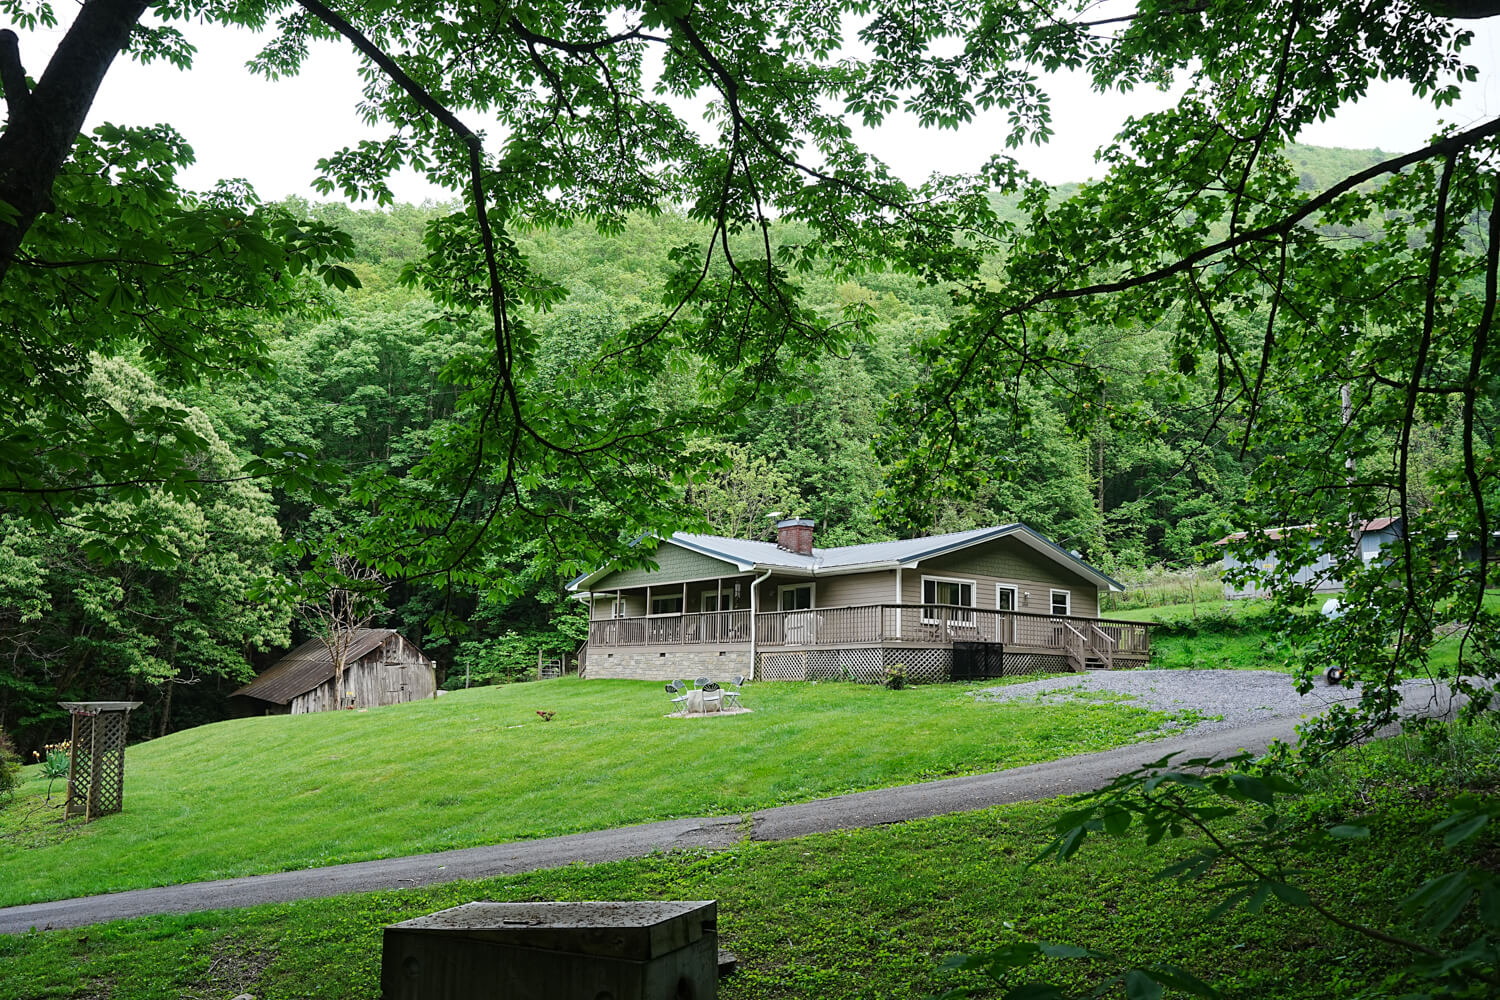 Vacation rental bordering the Smoky Mountain National park next to a 100 year old barn